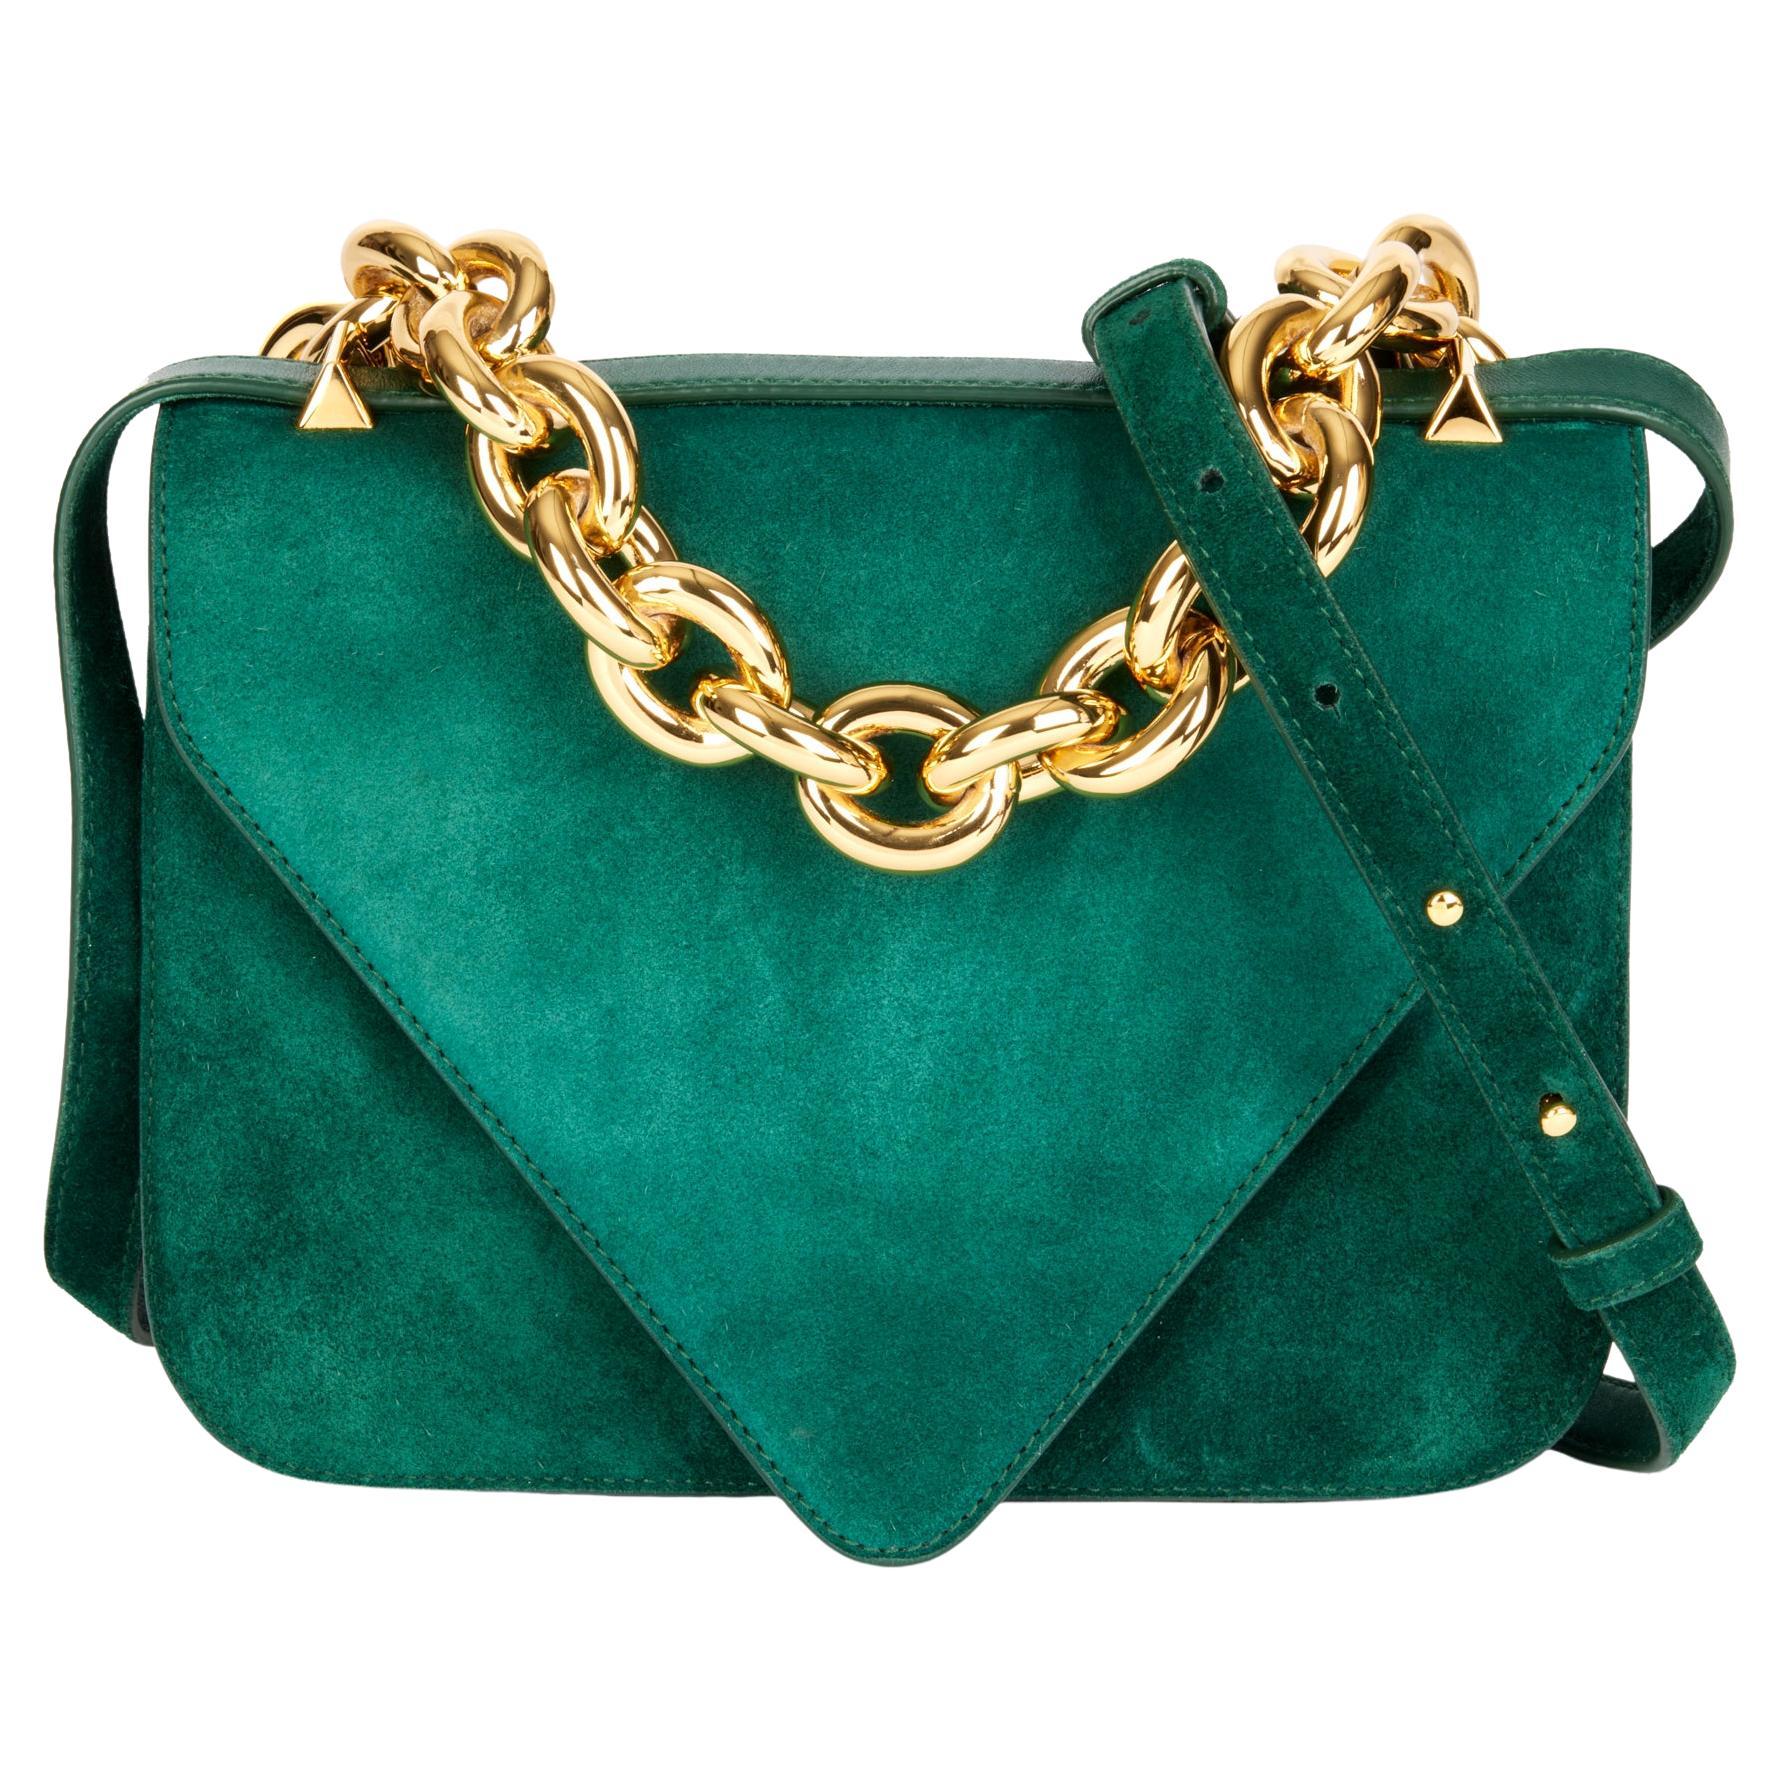 Chanel Green Lambskin Flap Top Handle Bag with Golden Hardware at